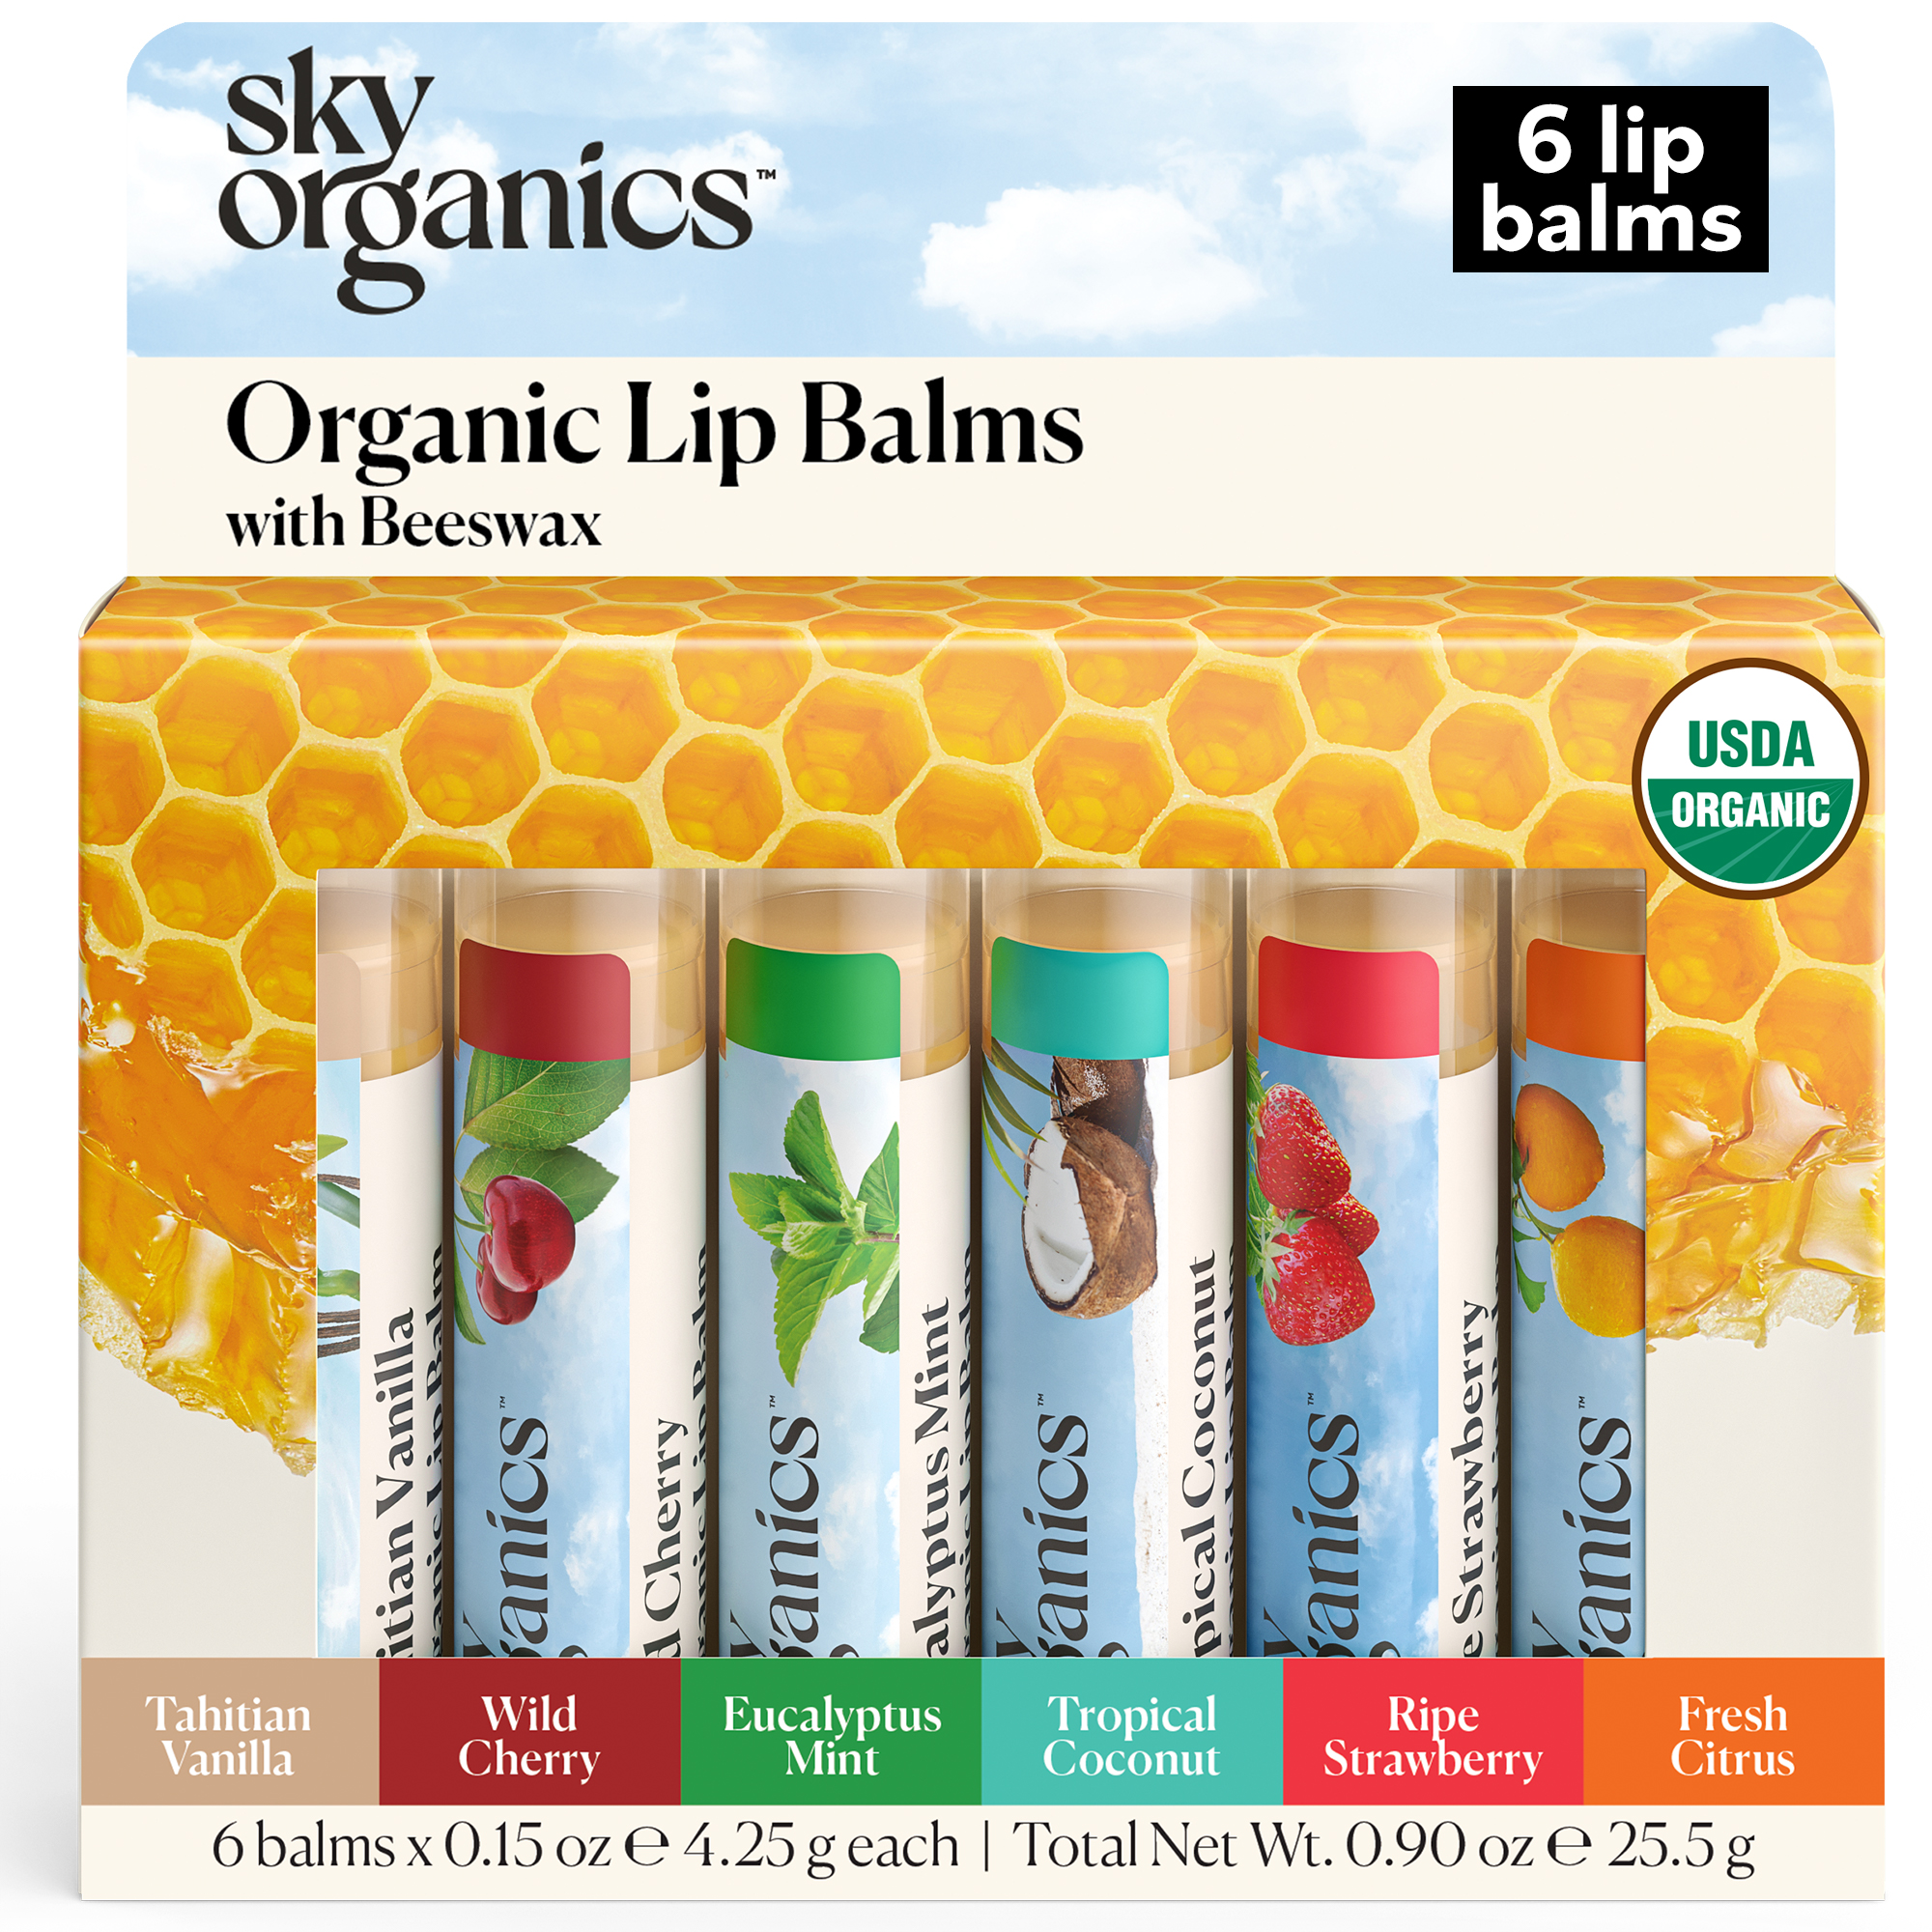 Sky Organics Organic Lip Balm with Beeswax and a Rich Nourishing Blend of Plant Oils, Moisturizing Lips Balms to Lock In Moisture and Keep Lips Feeling Soft and Smooth, Six Assorted Flavors, 6pk. - image 1 of 8